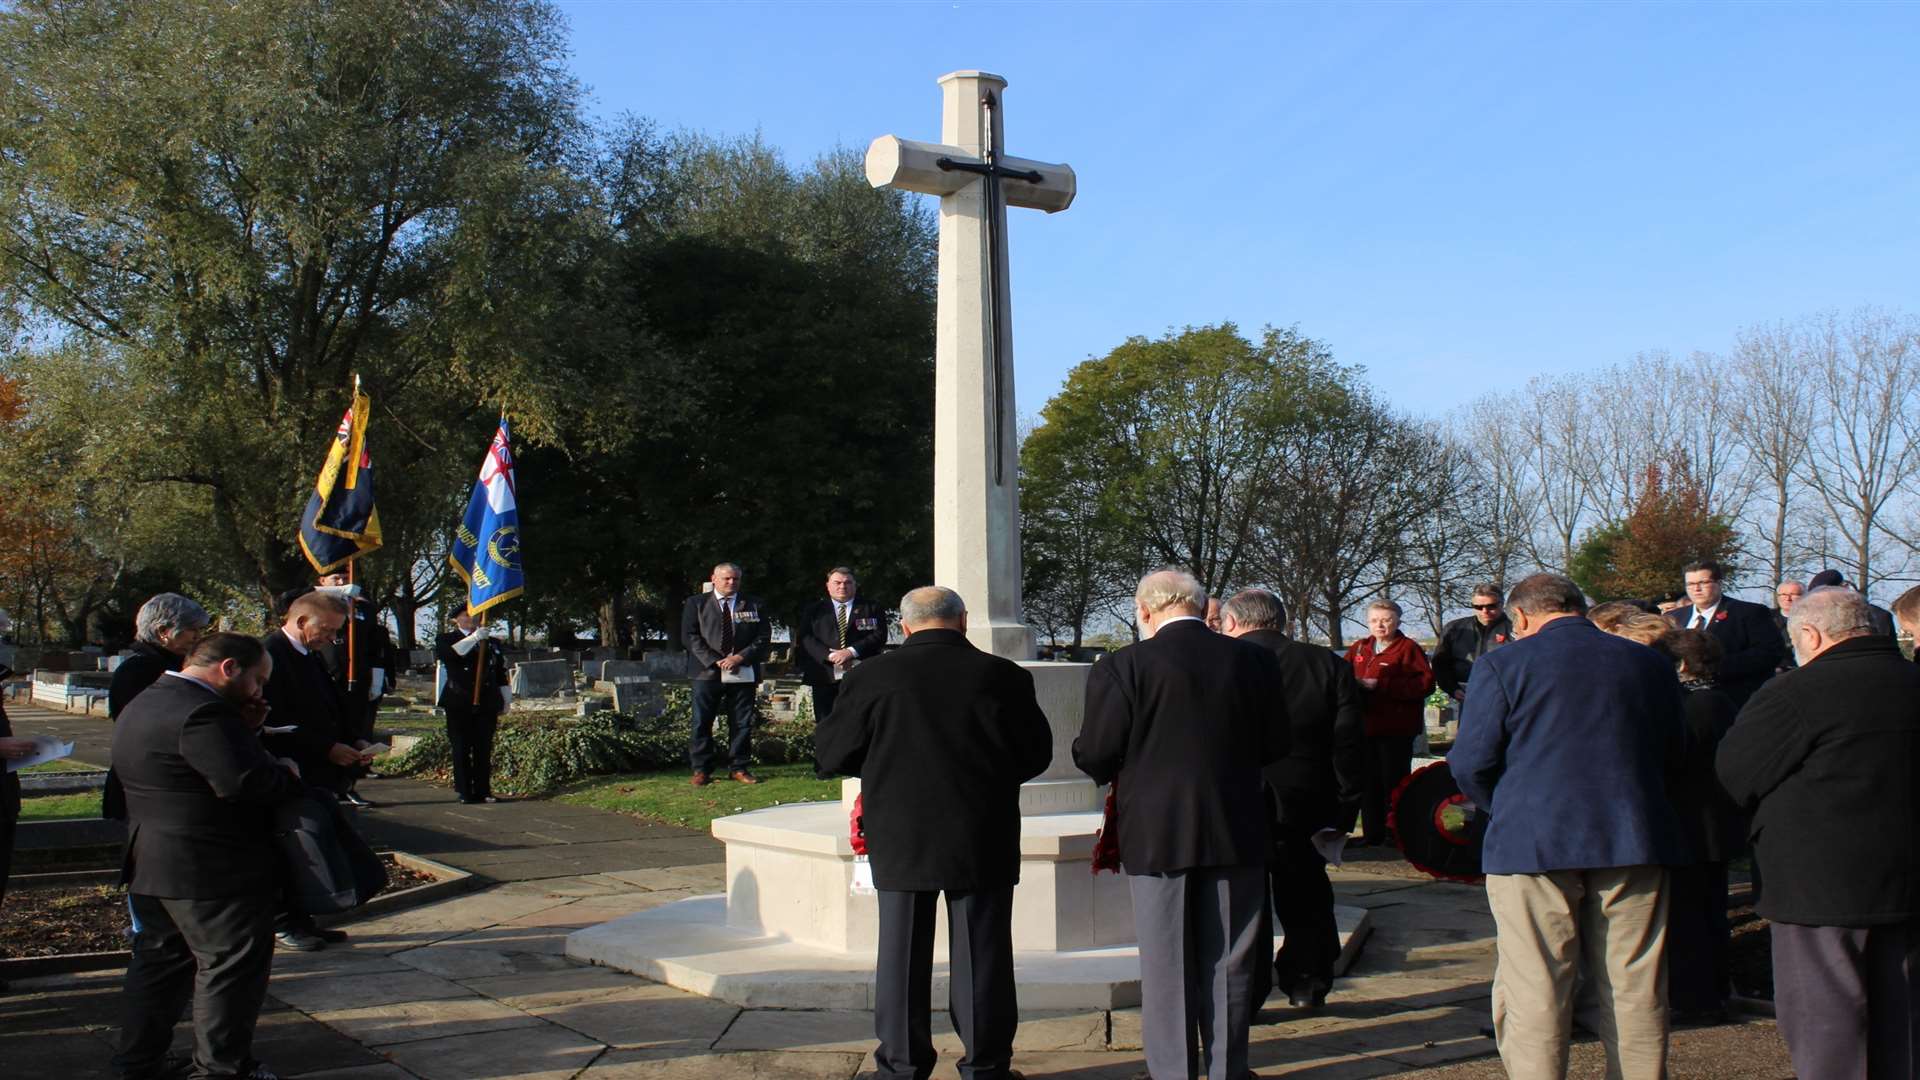 The service was taken by Royal British Legion padre Father Colin Johnson